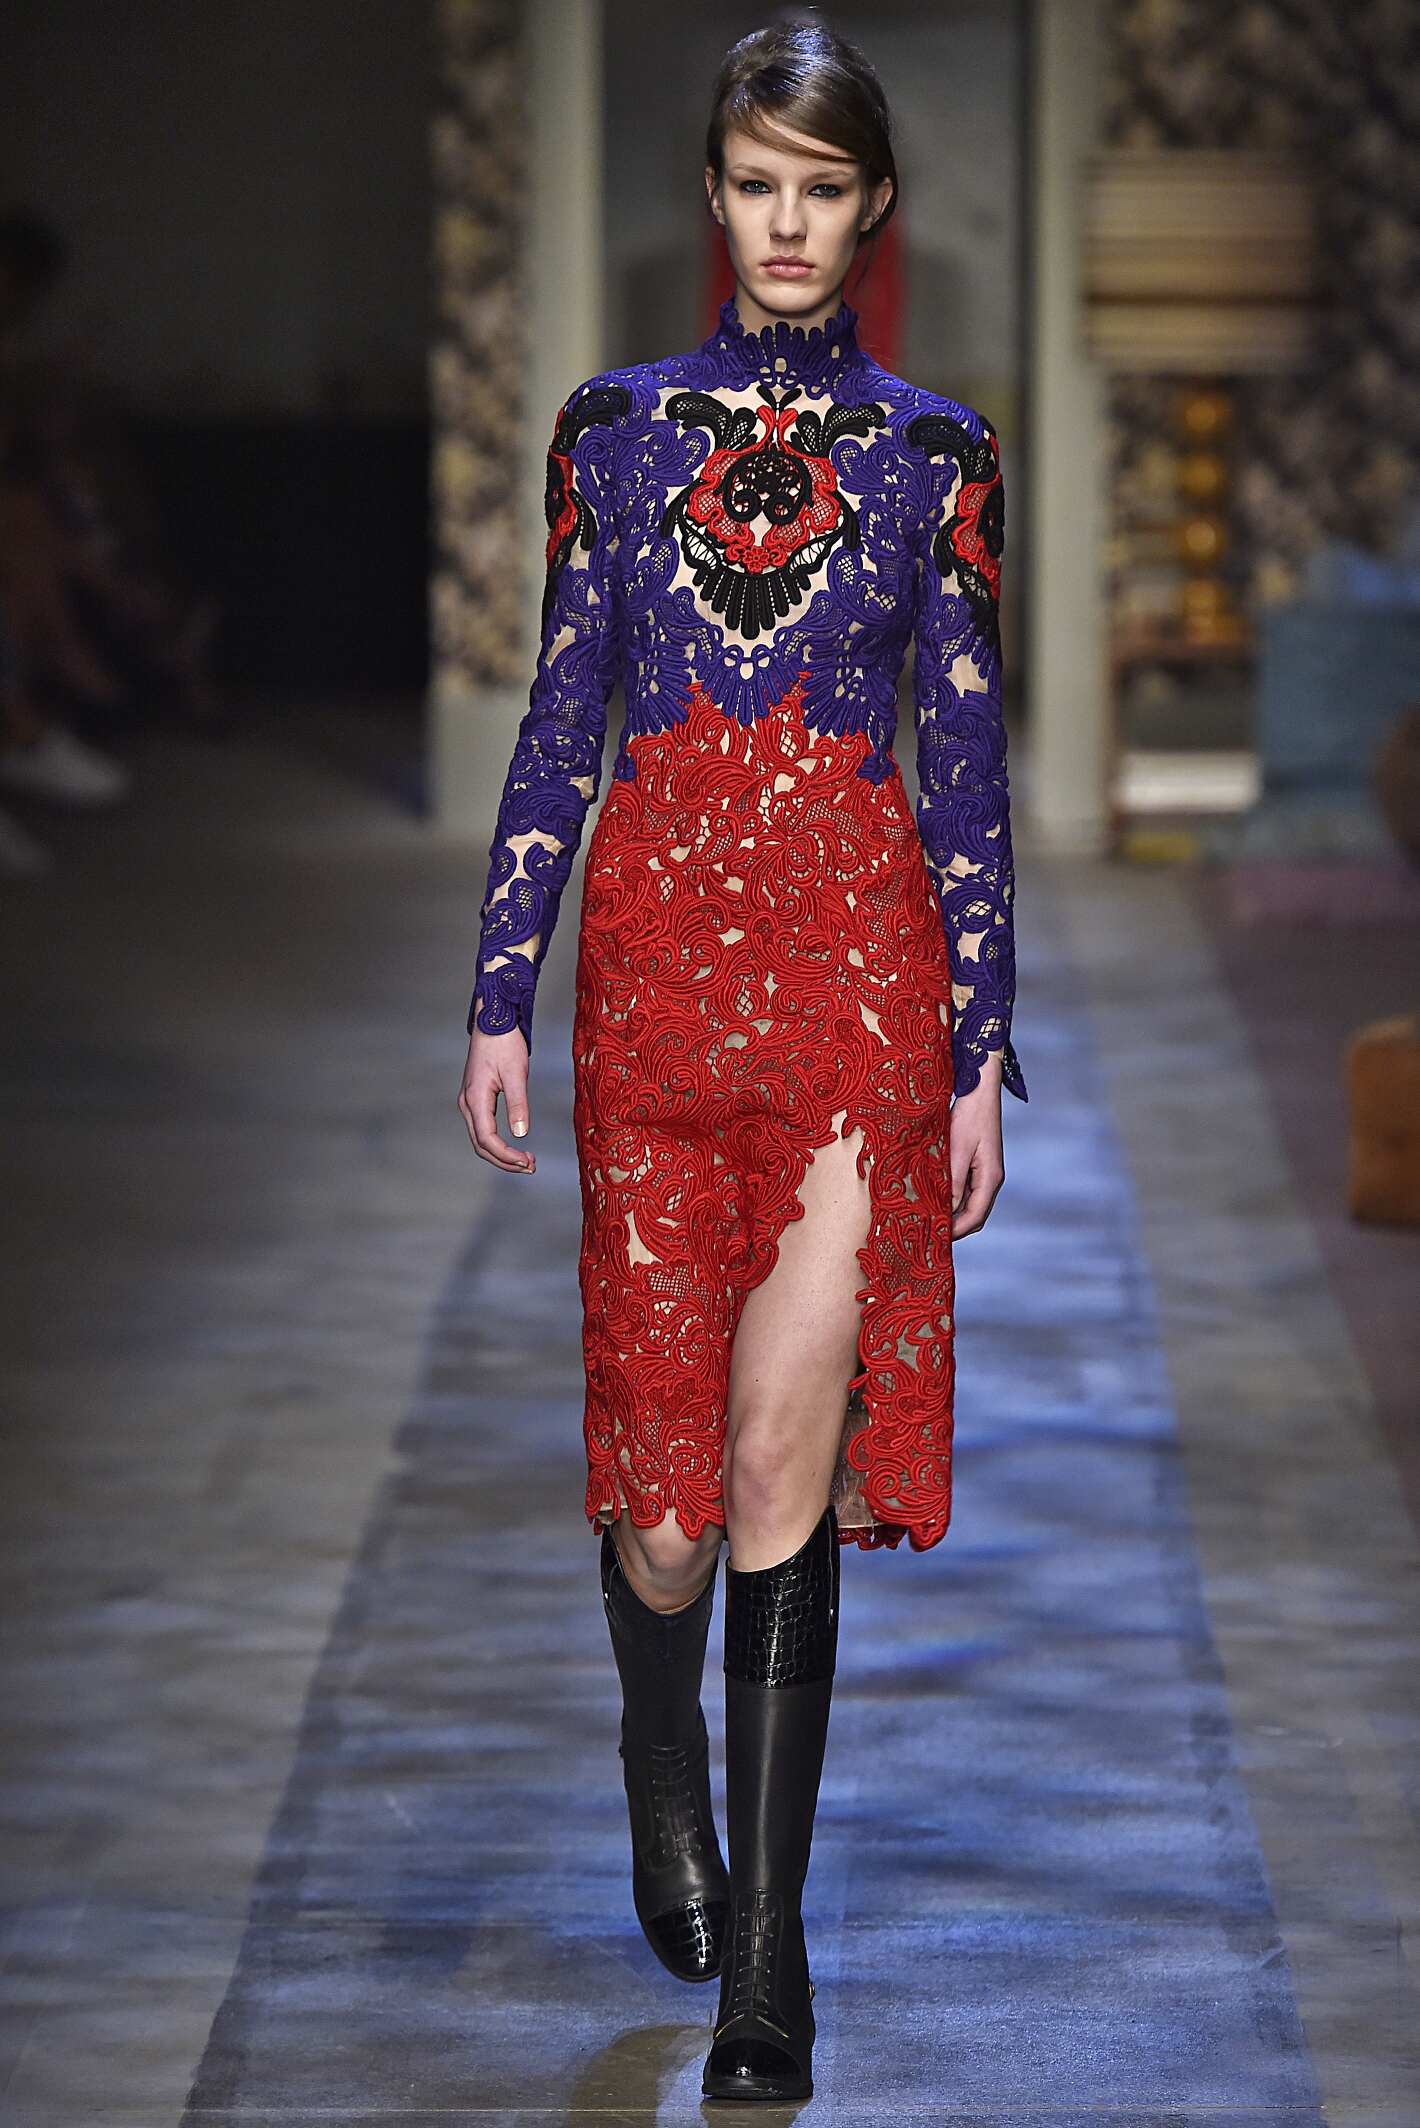 ERDEM FALL WINTER 2015-16 WOMEN’S COLLECTION | The Skinny Beep